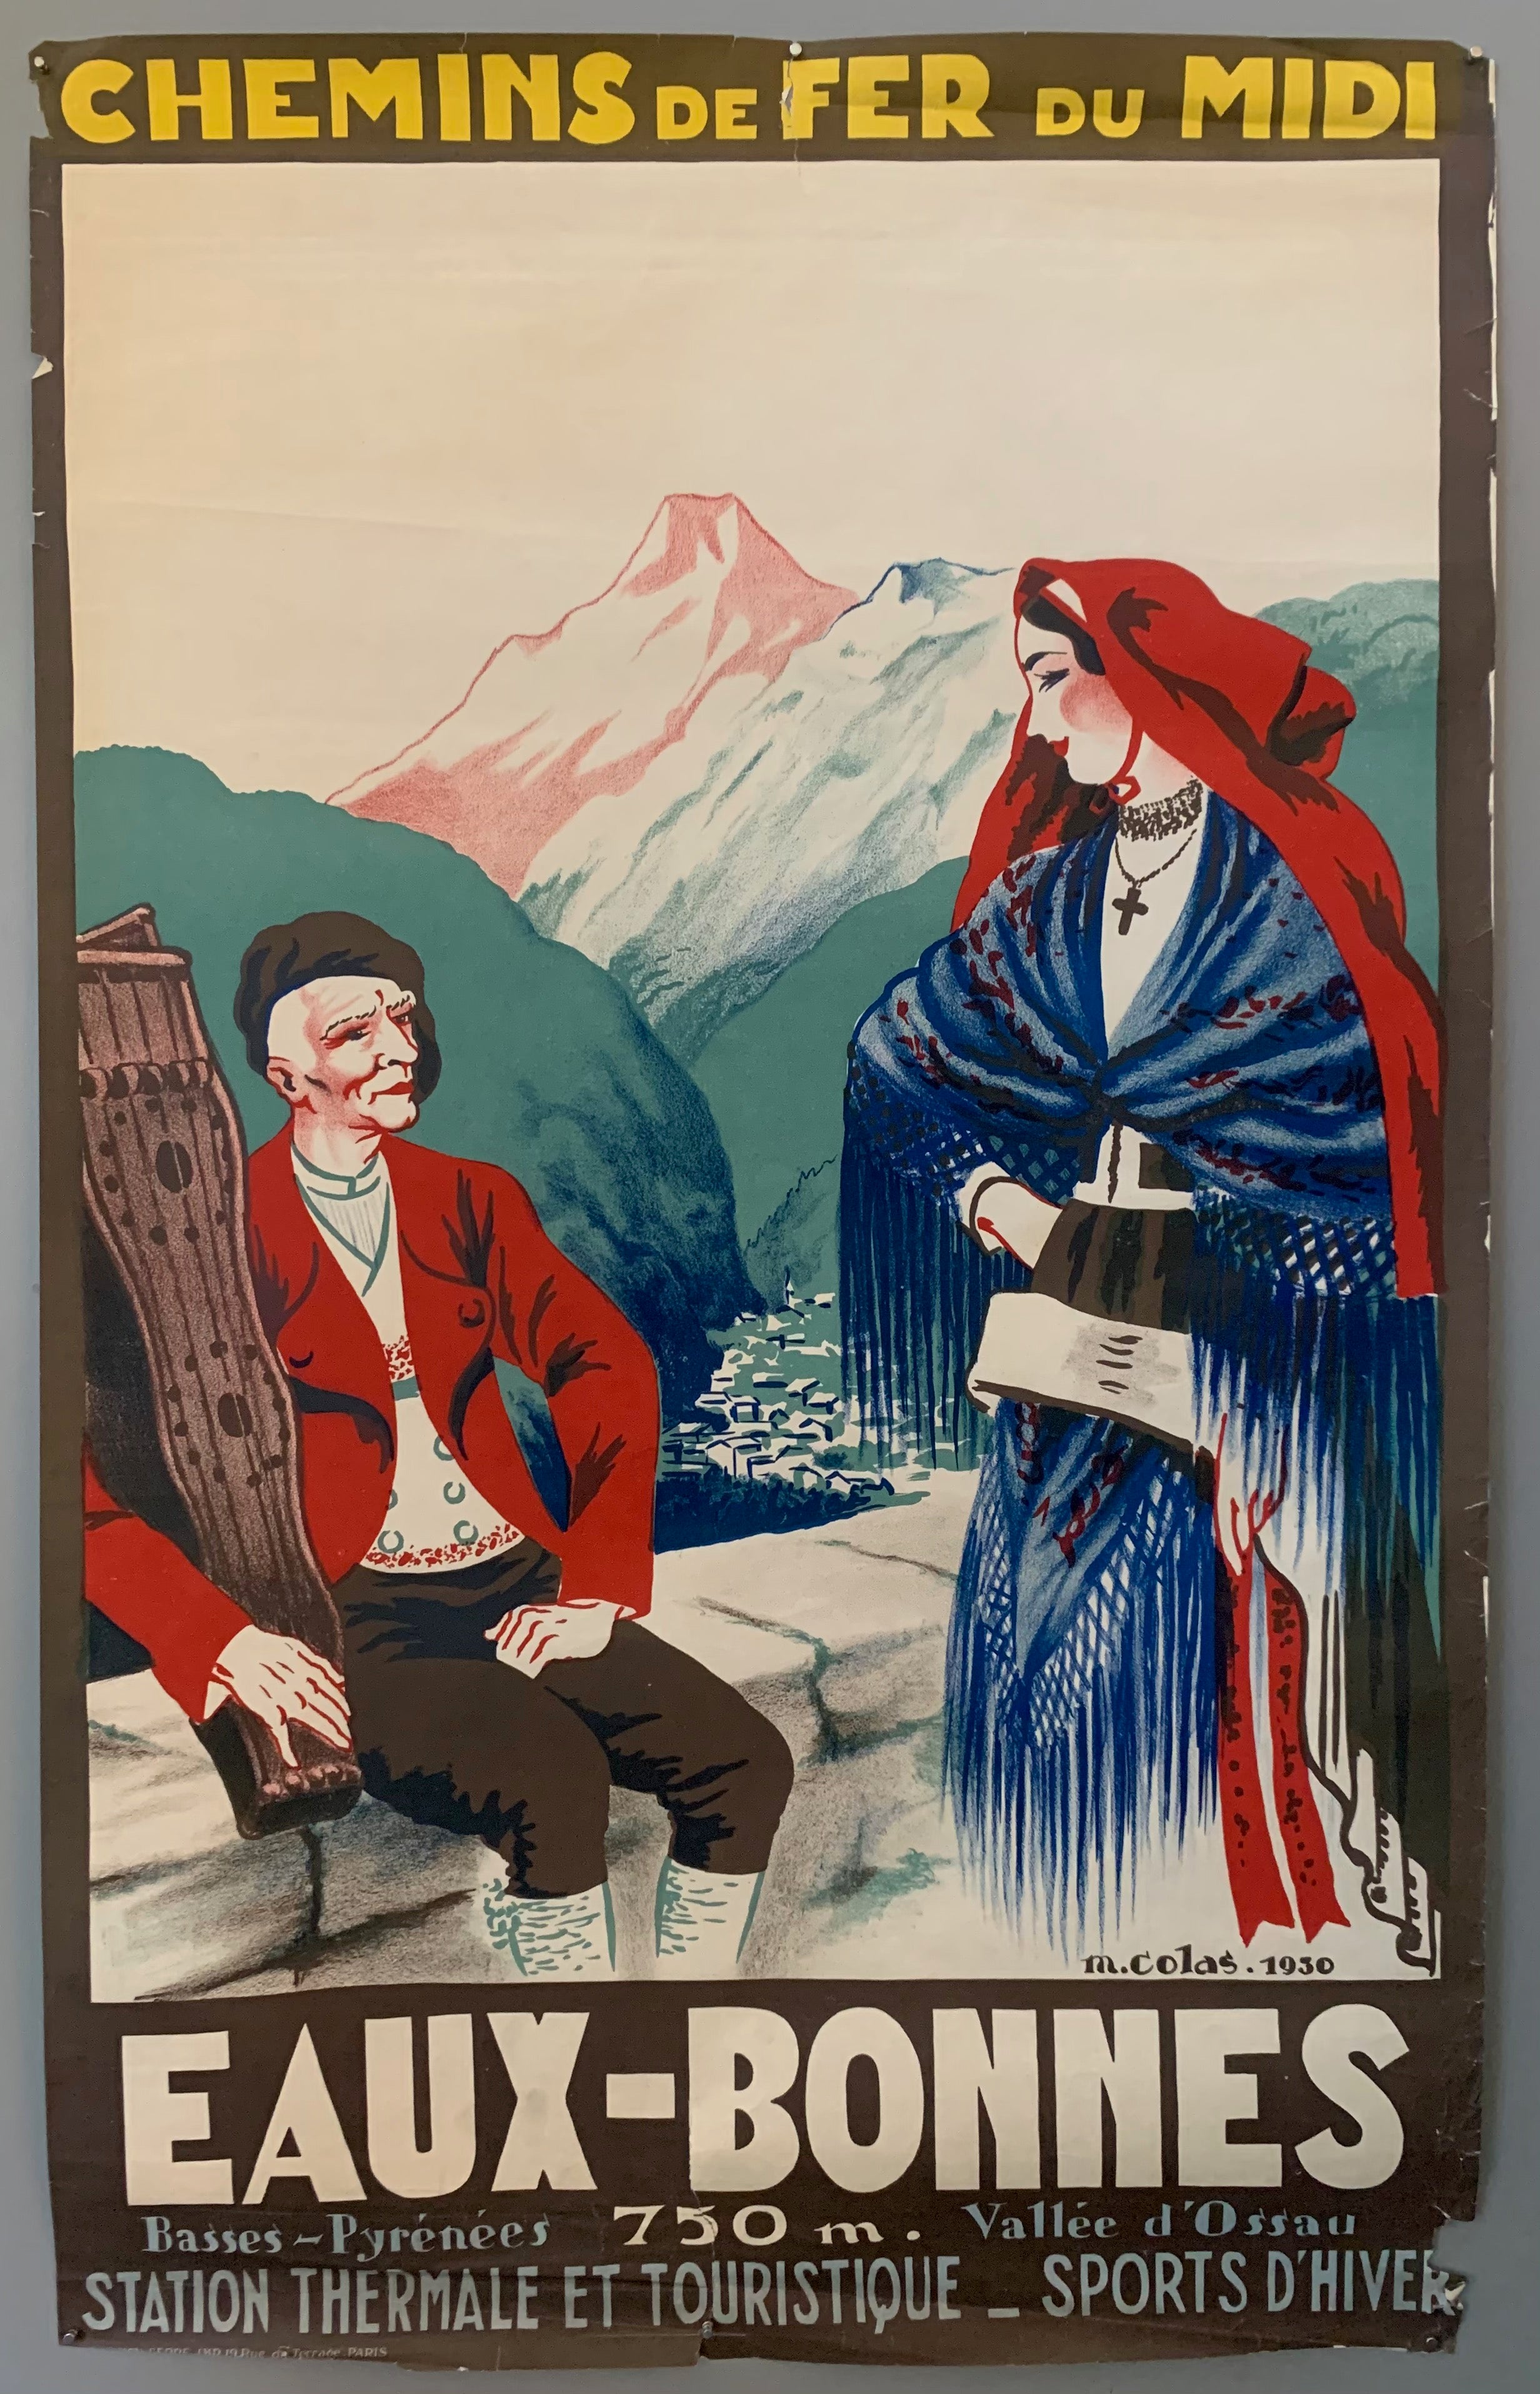 Two traditionally dressed residents sit on an overlook, the town nestled in the valley below. The mountain peaks stand out, matching the blue, red, and green color scheme of the rest of the poster. The border is a brown color with bold yellow, white, and grey writing. 